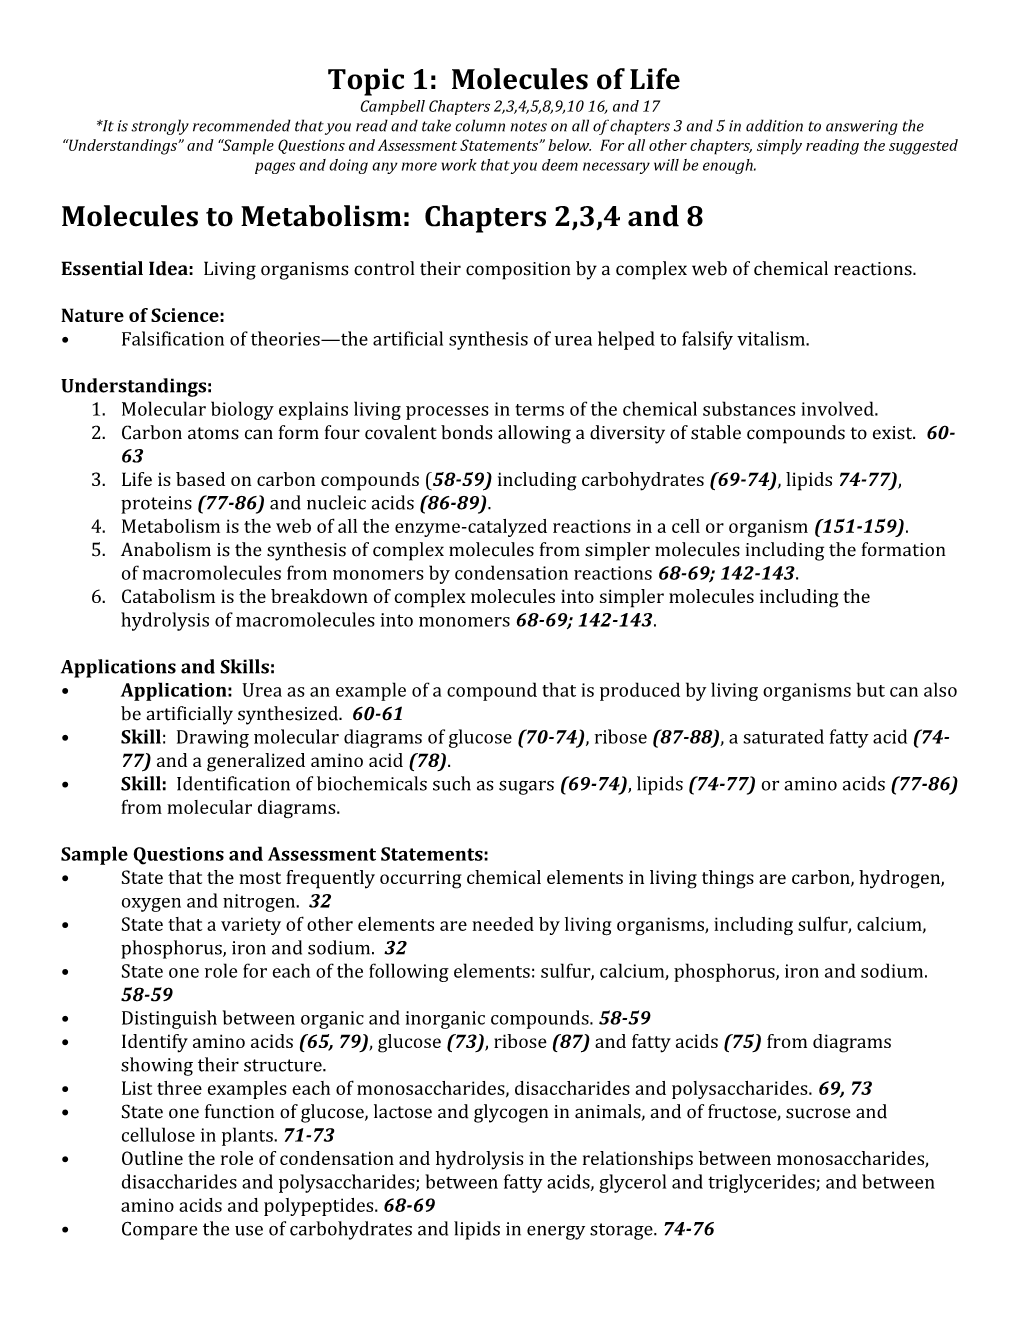 Molecules to Metabolism: Chapters 2,3,4 and 8